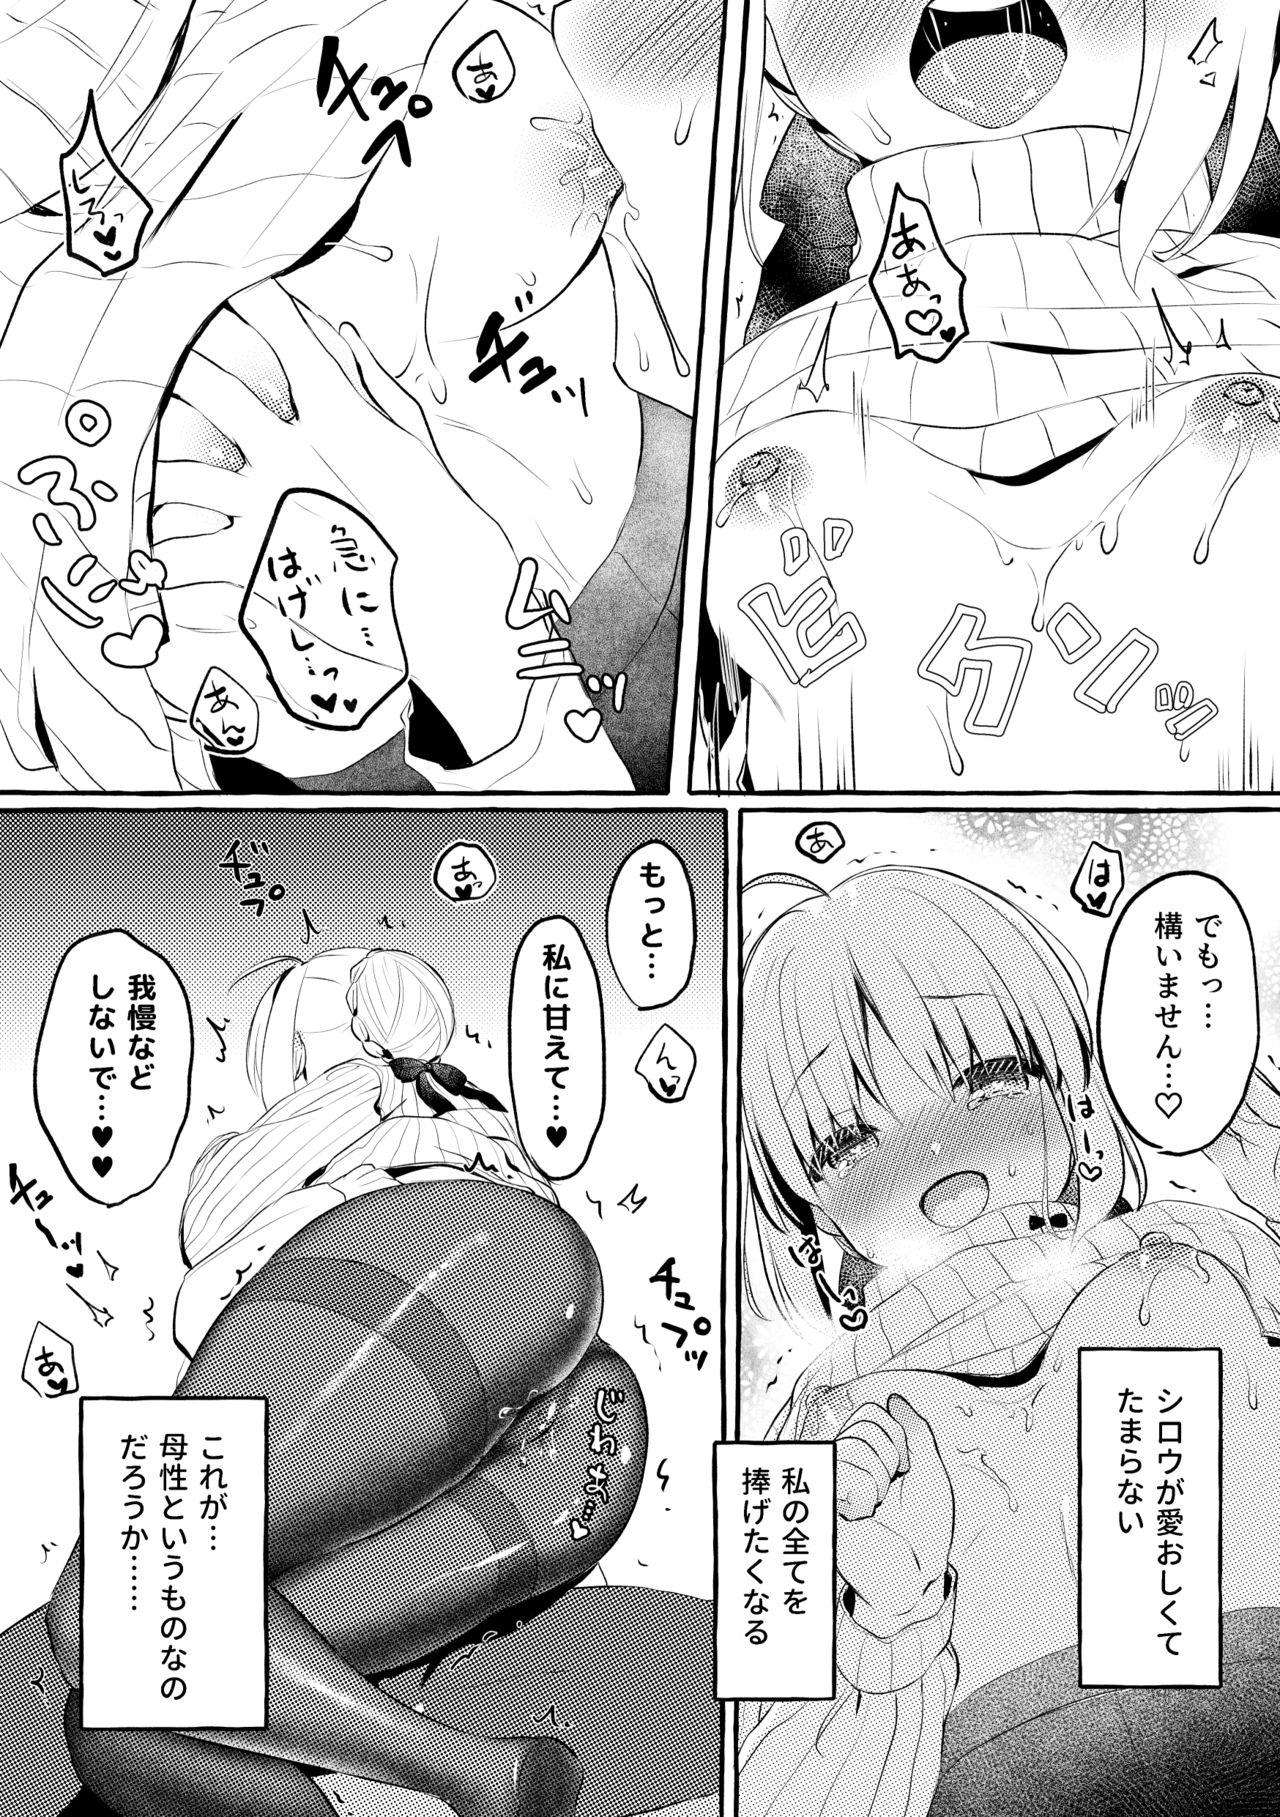 Branquinha Saber-san no Oppai ni Amaetai. - Fate stay night Submission - Page 8